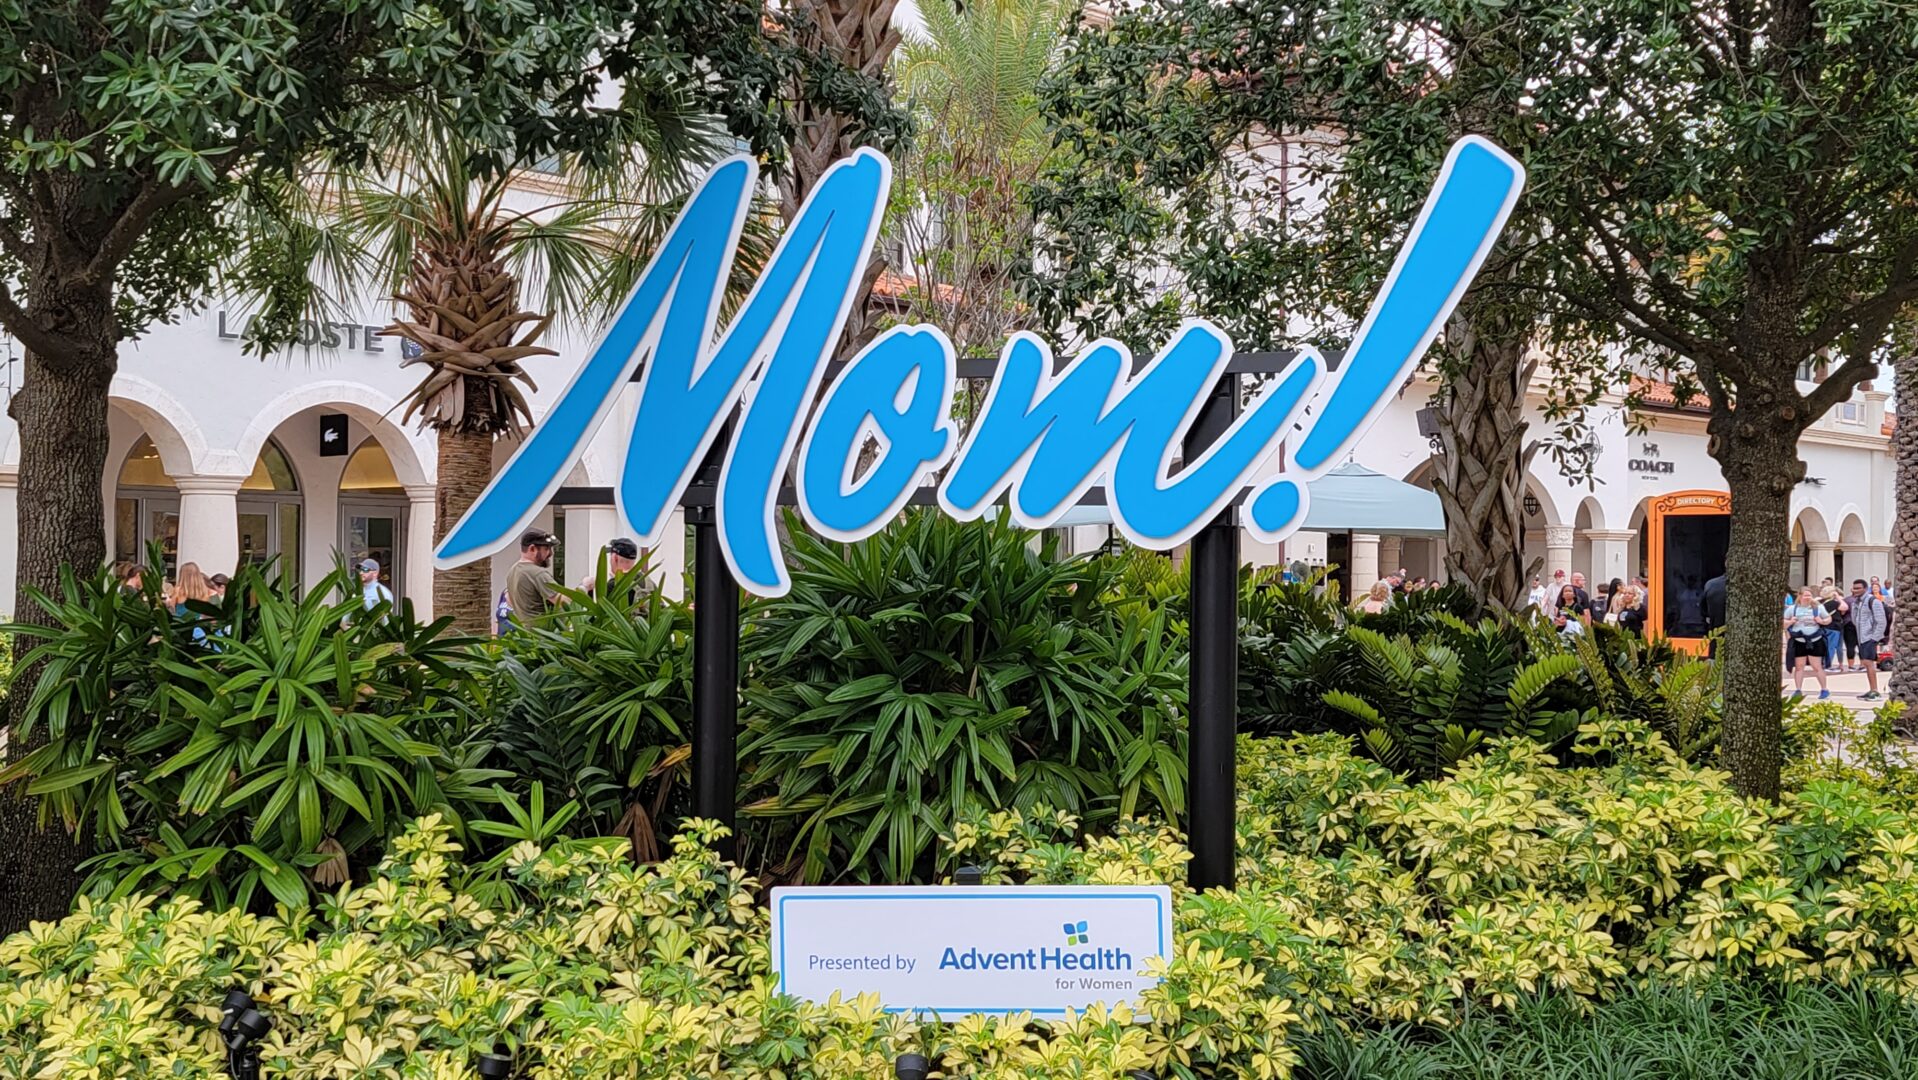 Advent Health Celebrates Mother’s Day at Disney Springs